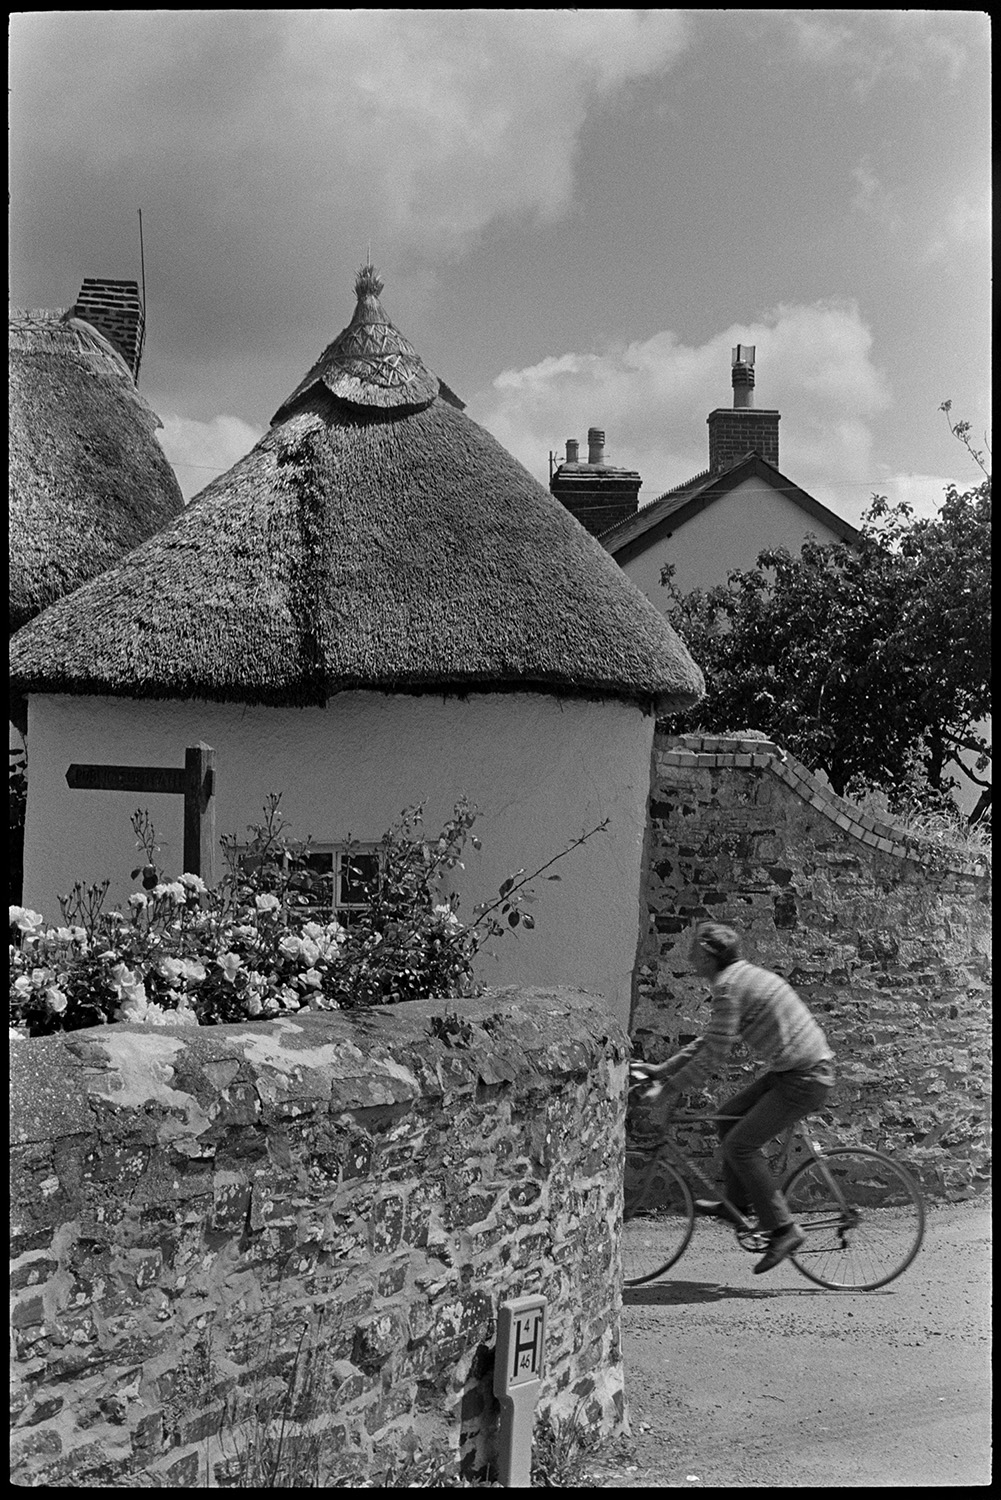 Street scene, woman carrying flowers. 
[A man cycling past a thatched cottage and walled garden in West Lane, Dolton. Flowers can be seen in the walled garden.]